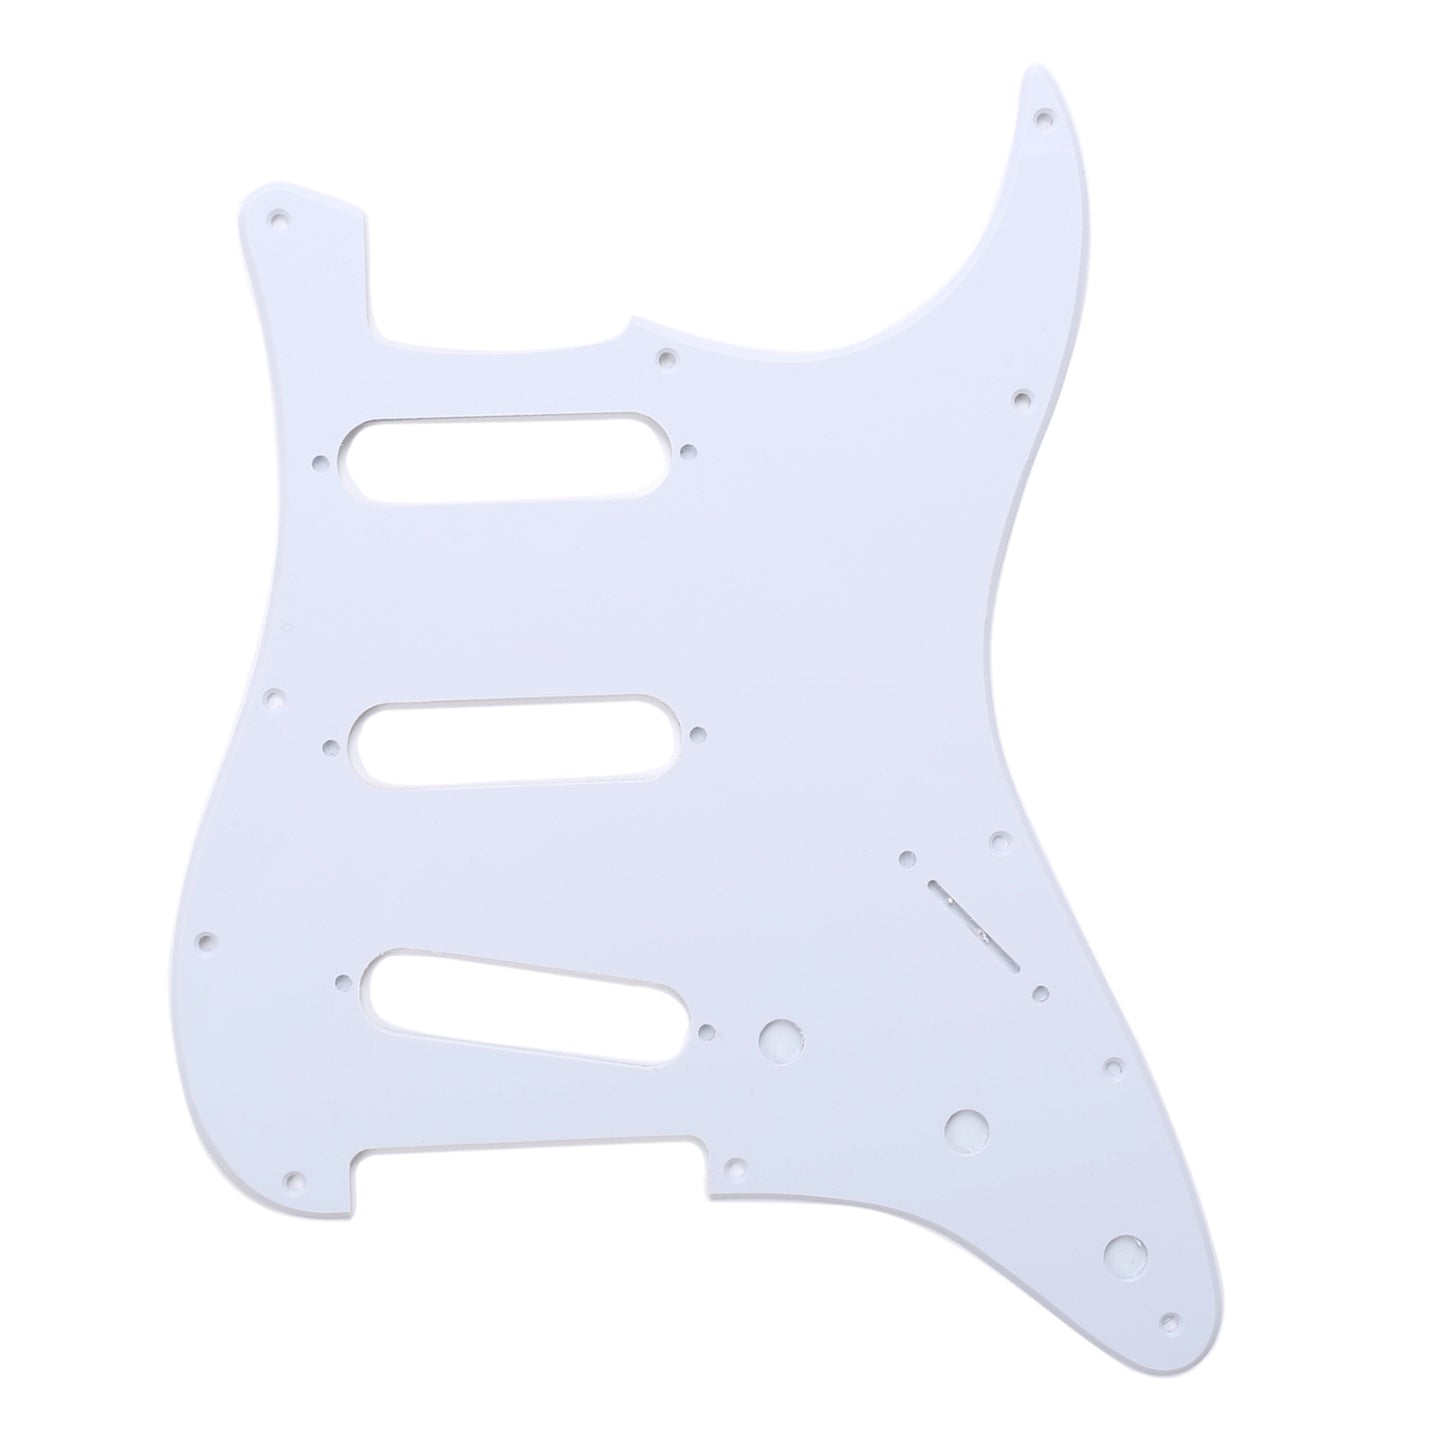 Musiclily SSS 11 Hole Strat Guitar Pickguard for Fender USA/Mexican Made Standard Stratocaster Modern Style, 1Ply White